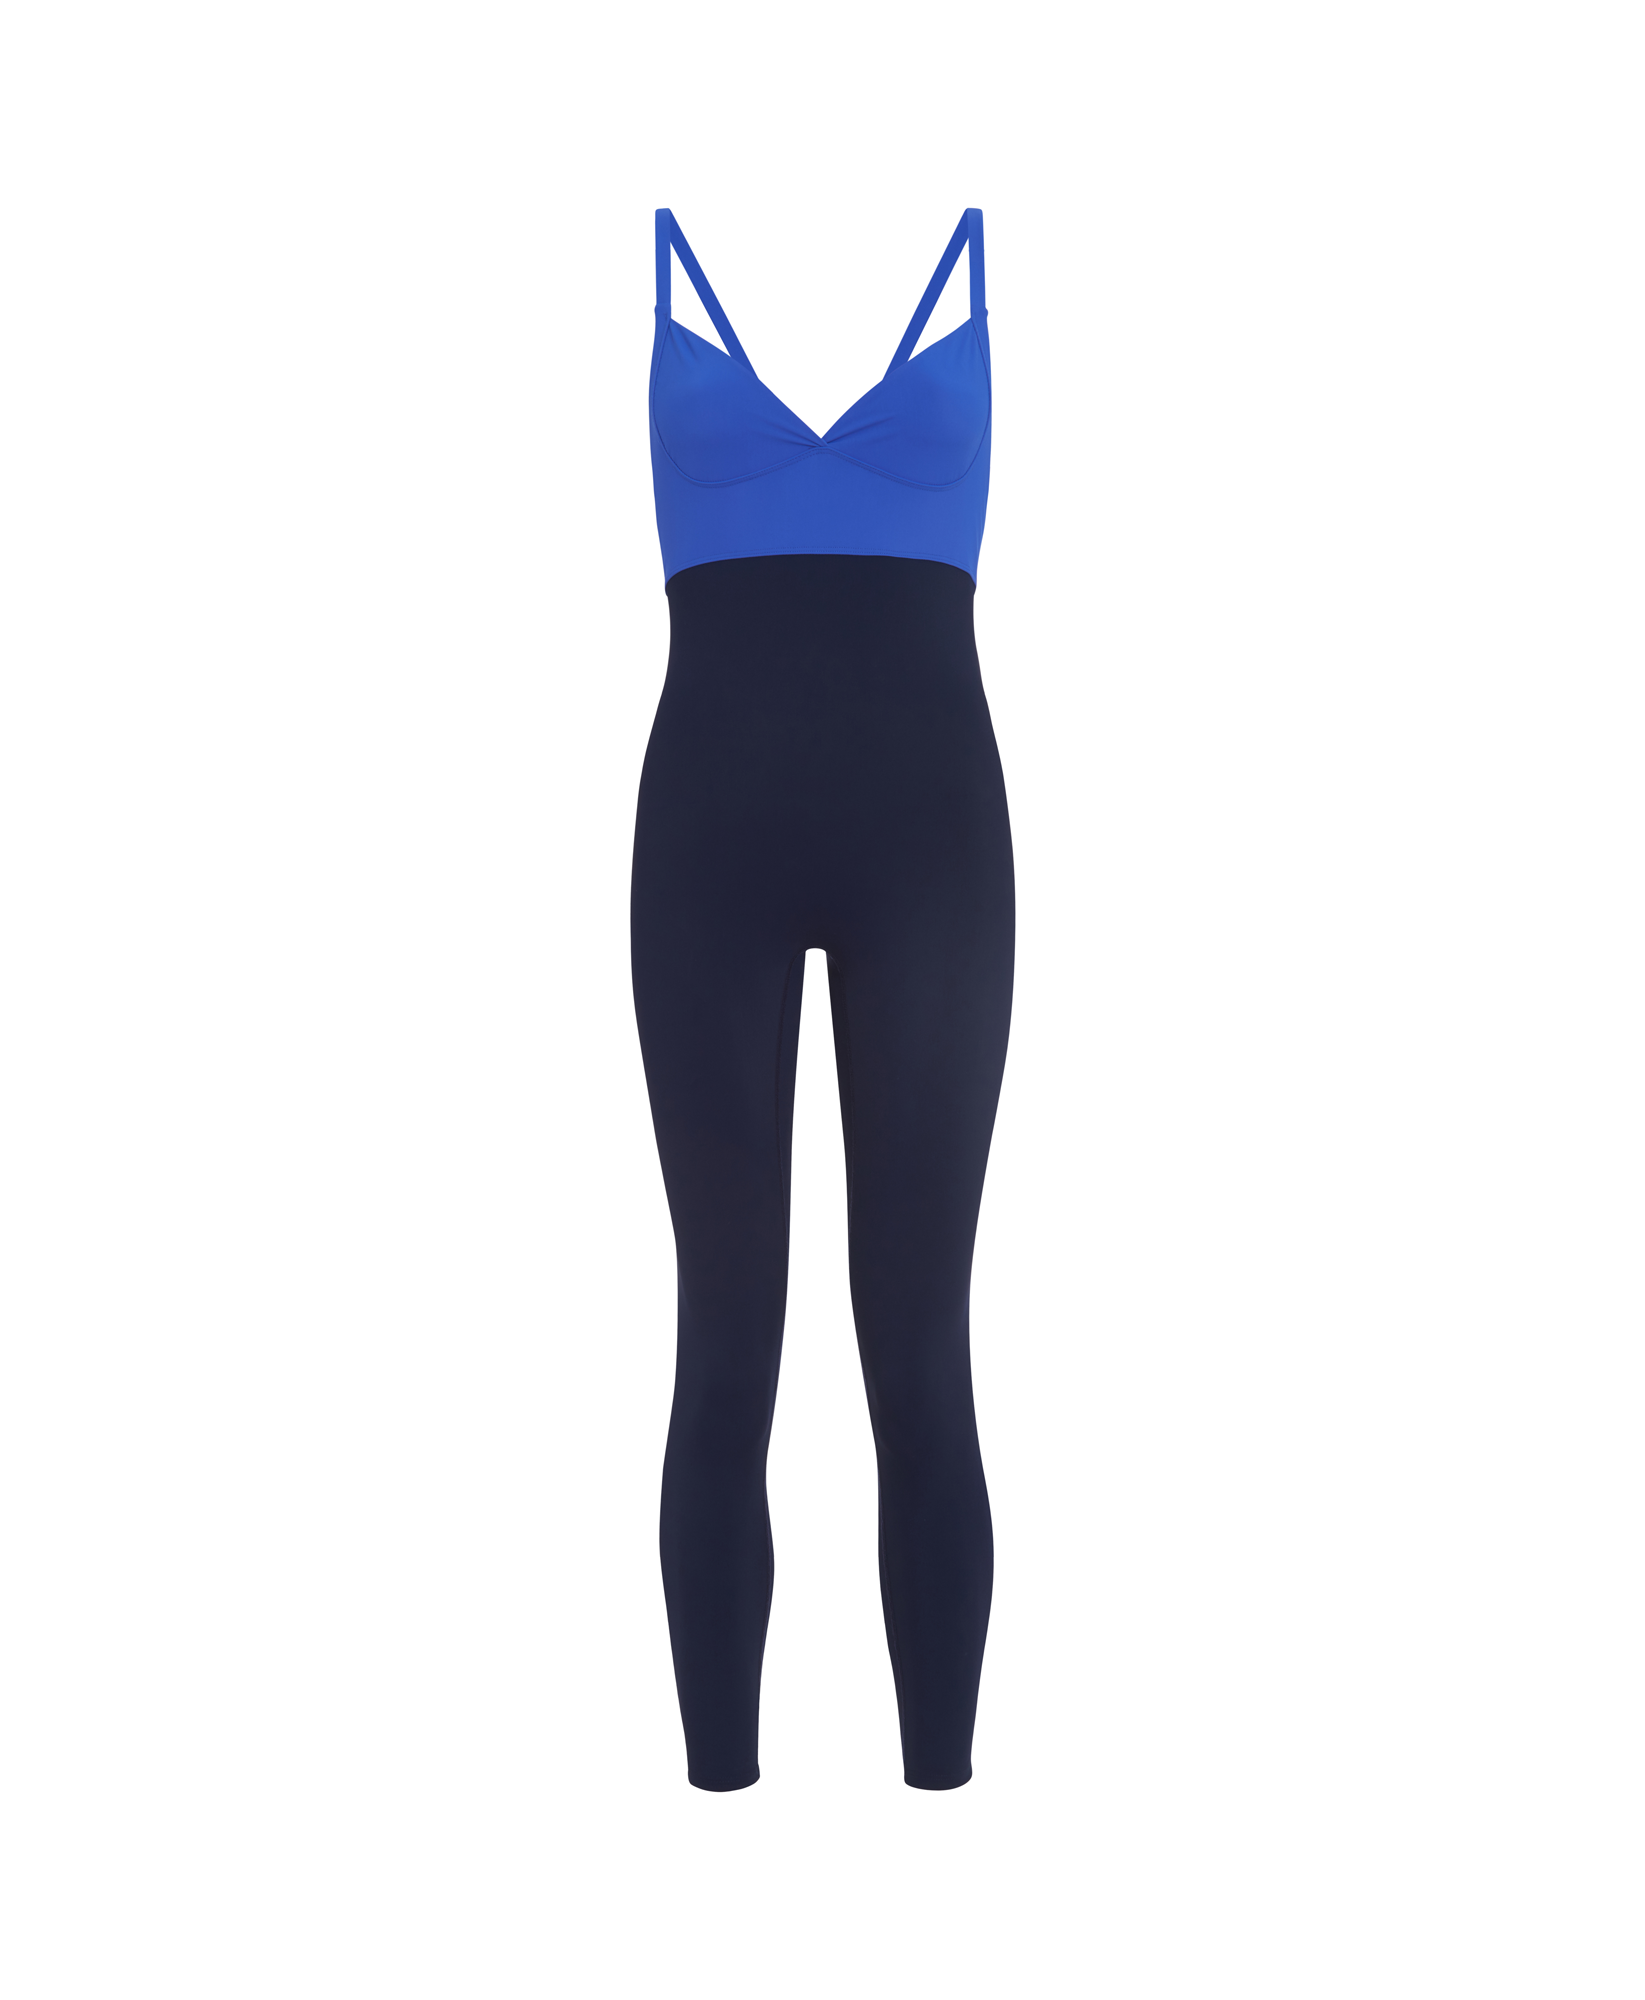 Women's Soft, Breathable Unitard Full Body Suit at UpWest